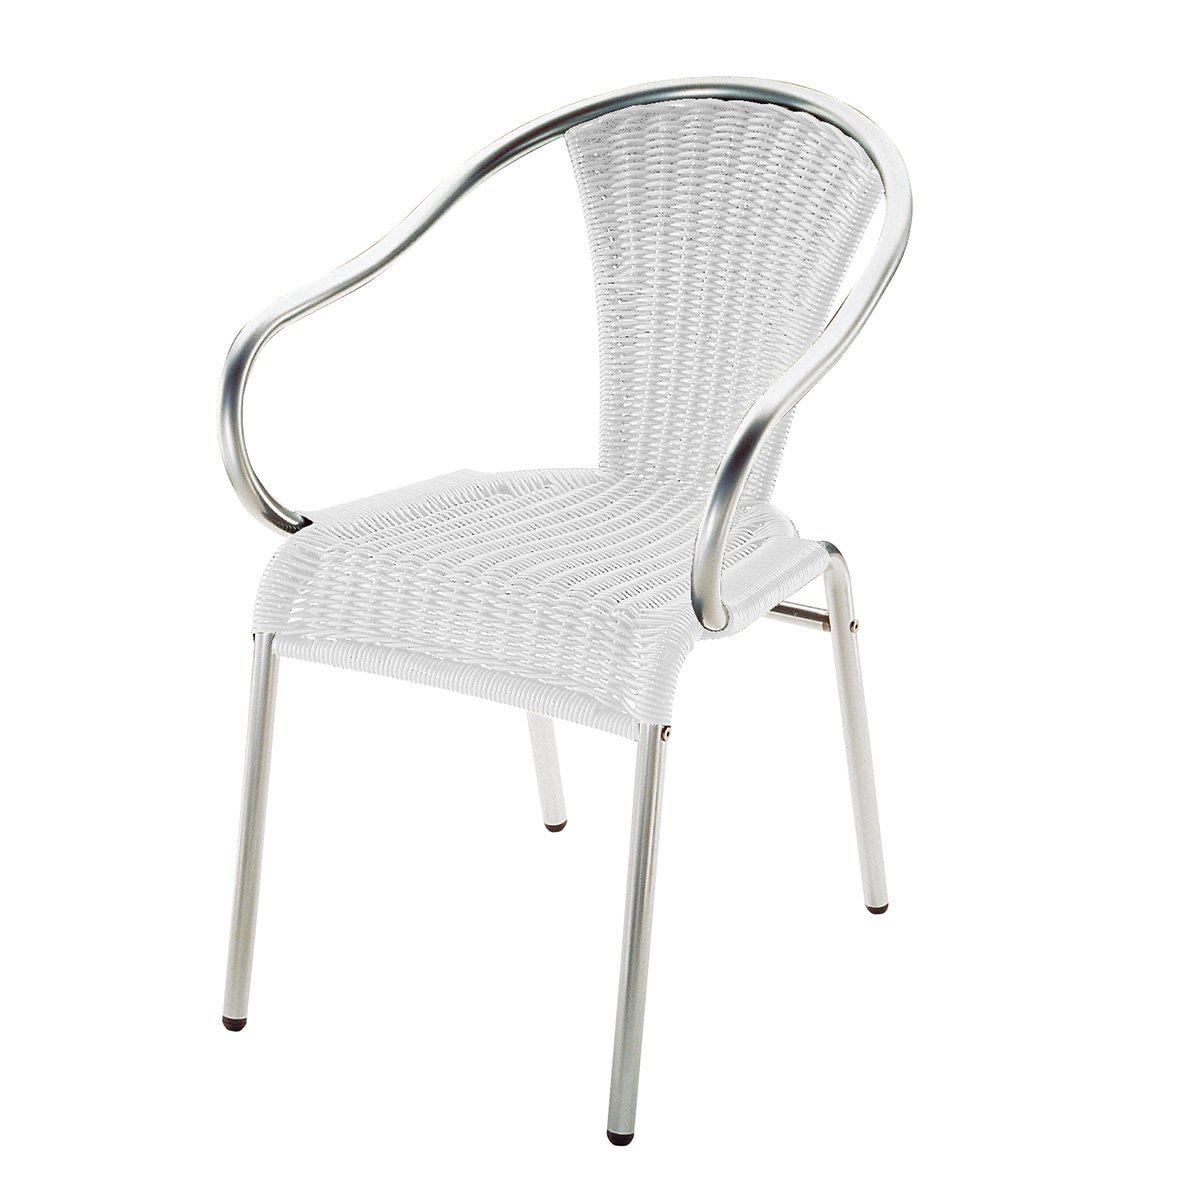 Barcino-Dining Chair (with arms)-Indea64